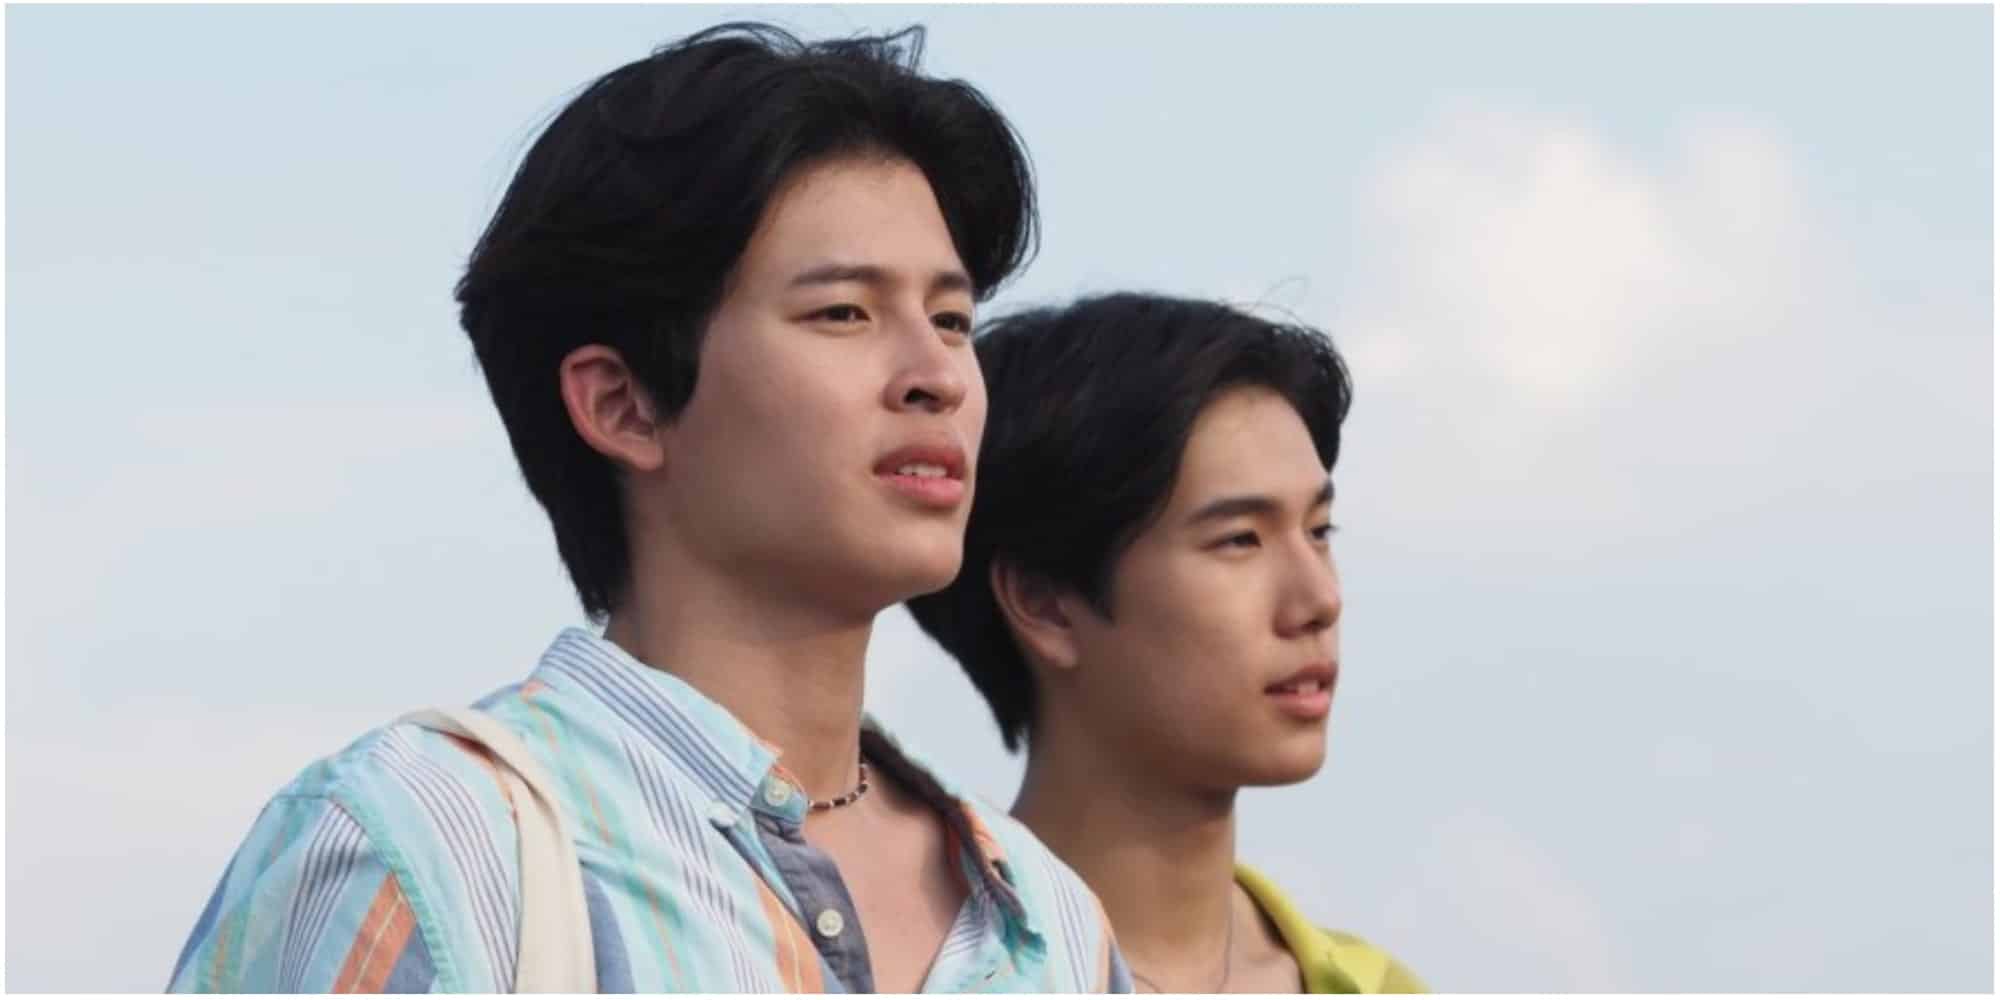 Never Let Me Go Thai BL Series Episode 11 Synopsis